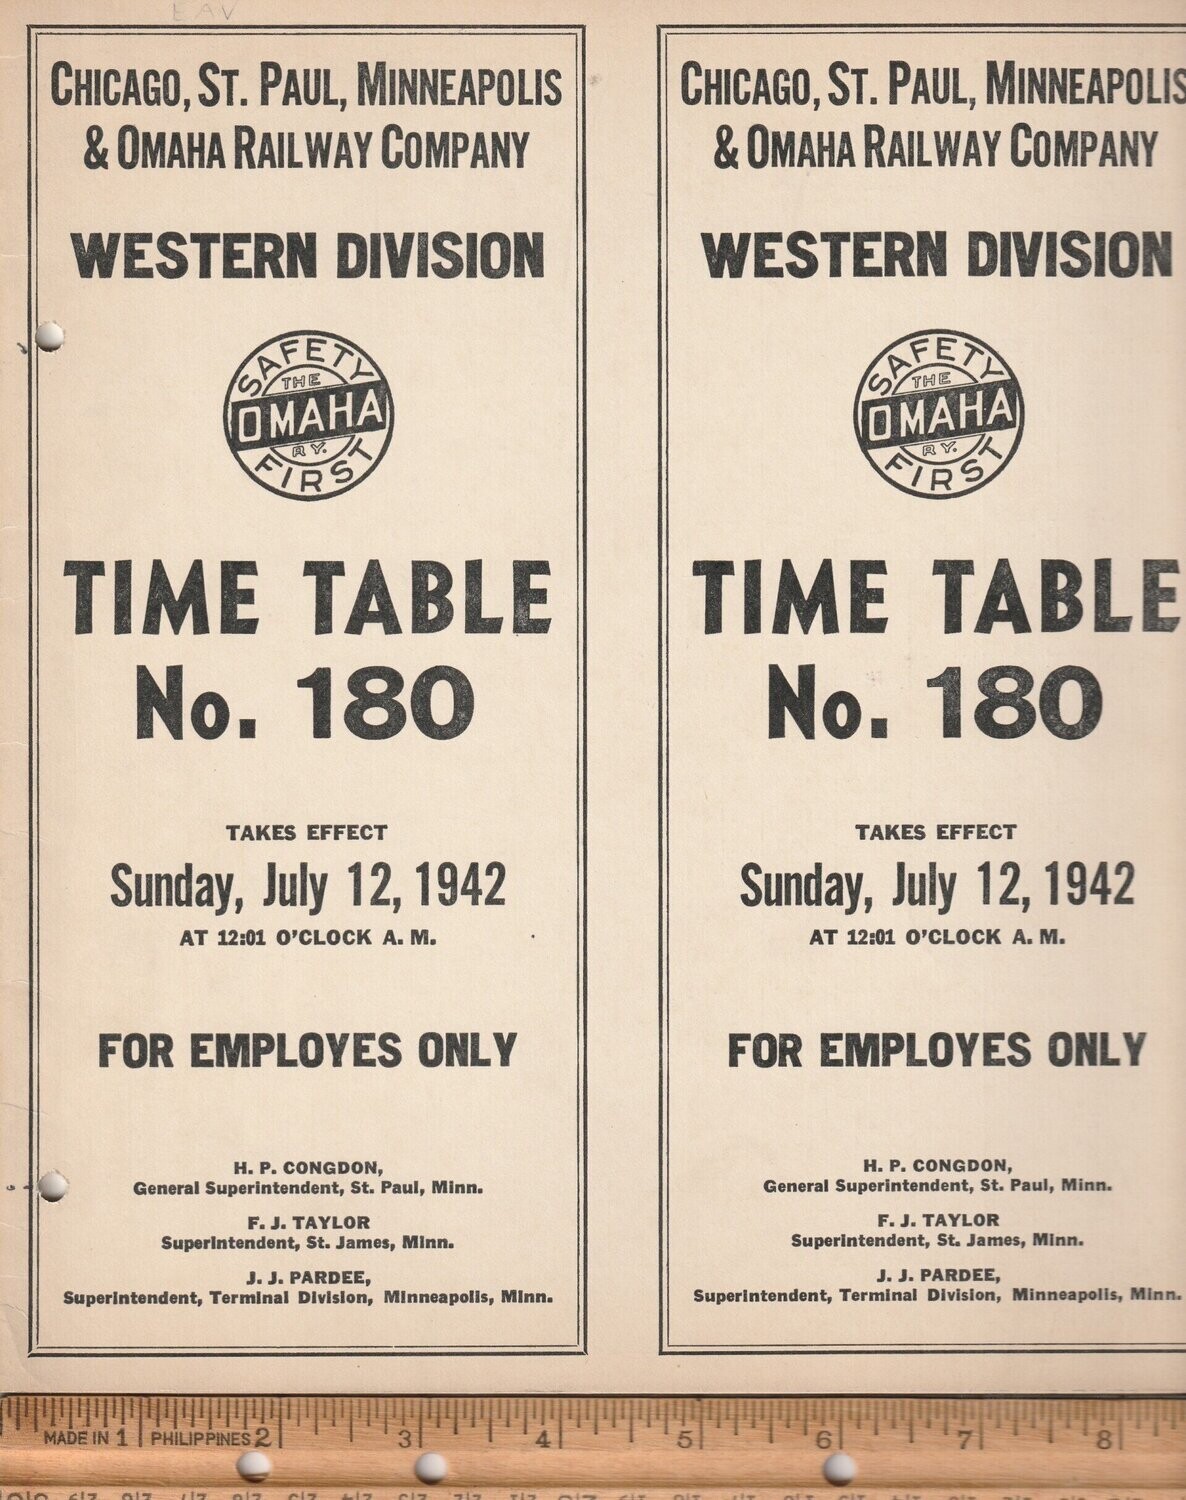 Chicago, St. Paul, Minneapolis & Omaha Western Division 1942